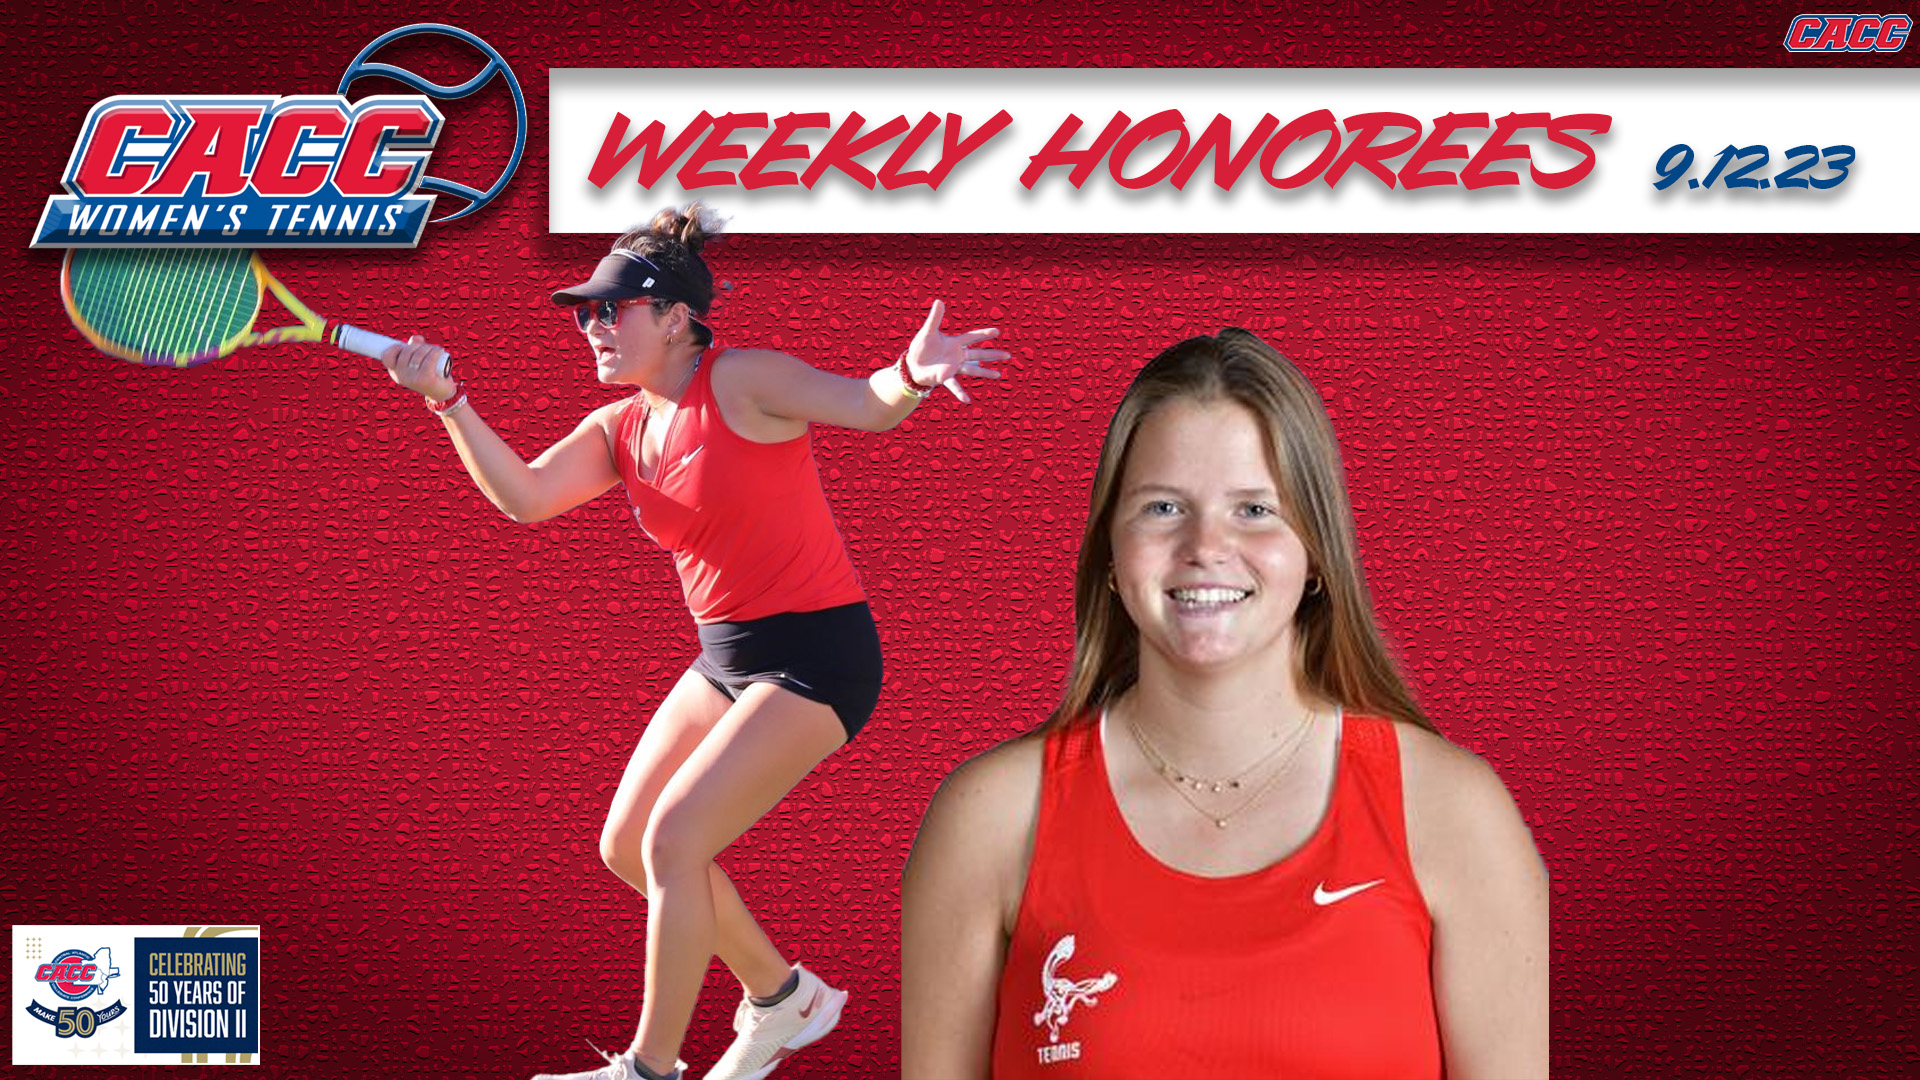 CACC Women's Tennis Weekly Honorees (9-12-23)